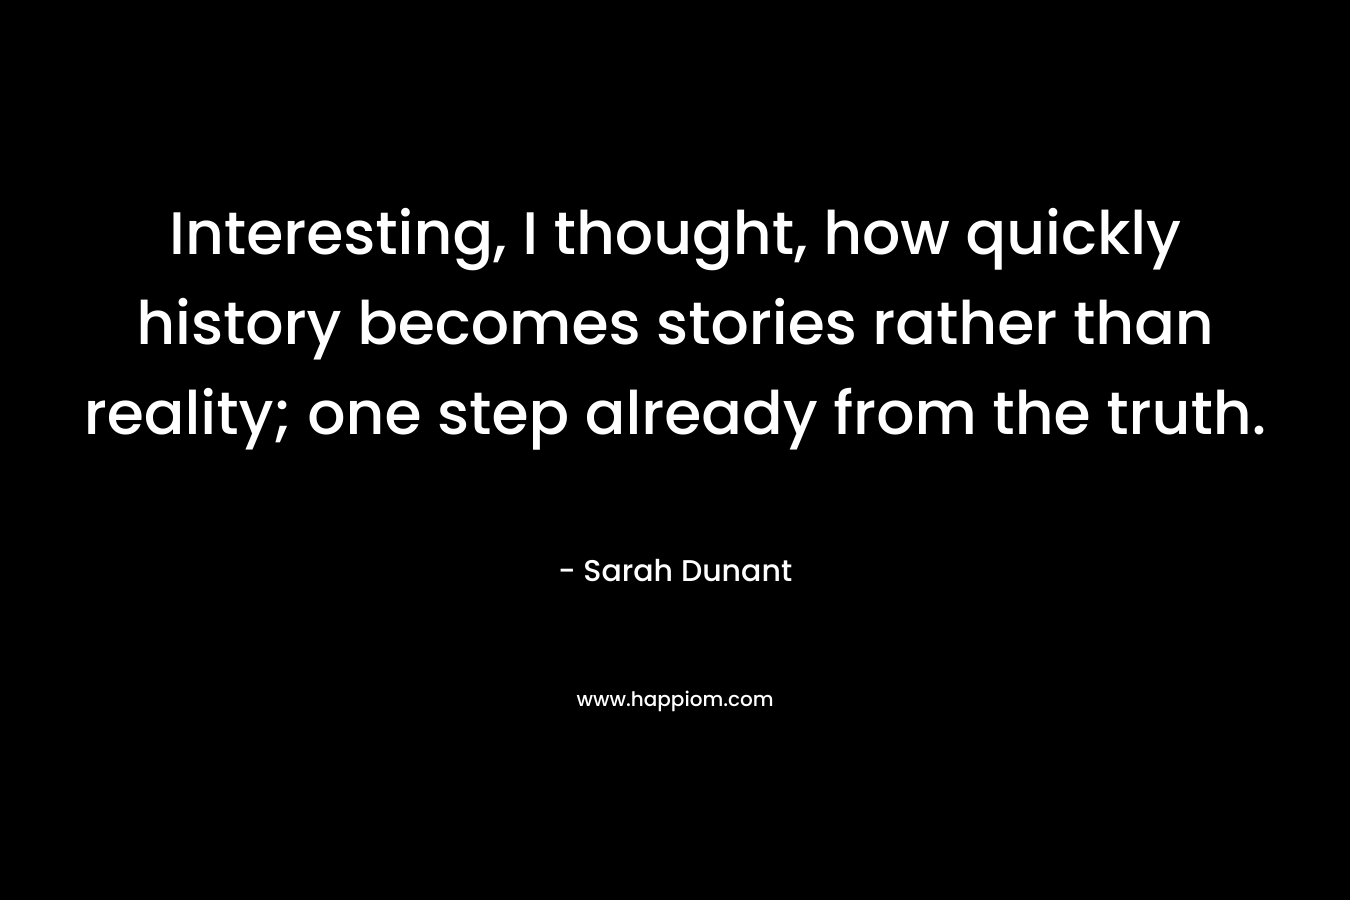 Interesting, I thought, how quickly history becomes stories rather than reality; one step already from the truth.